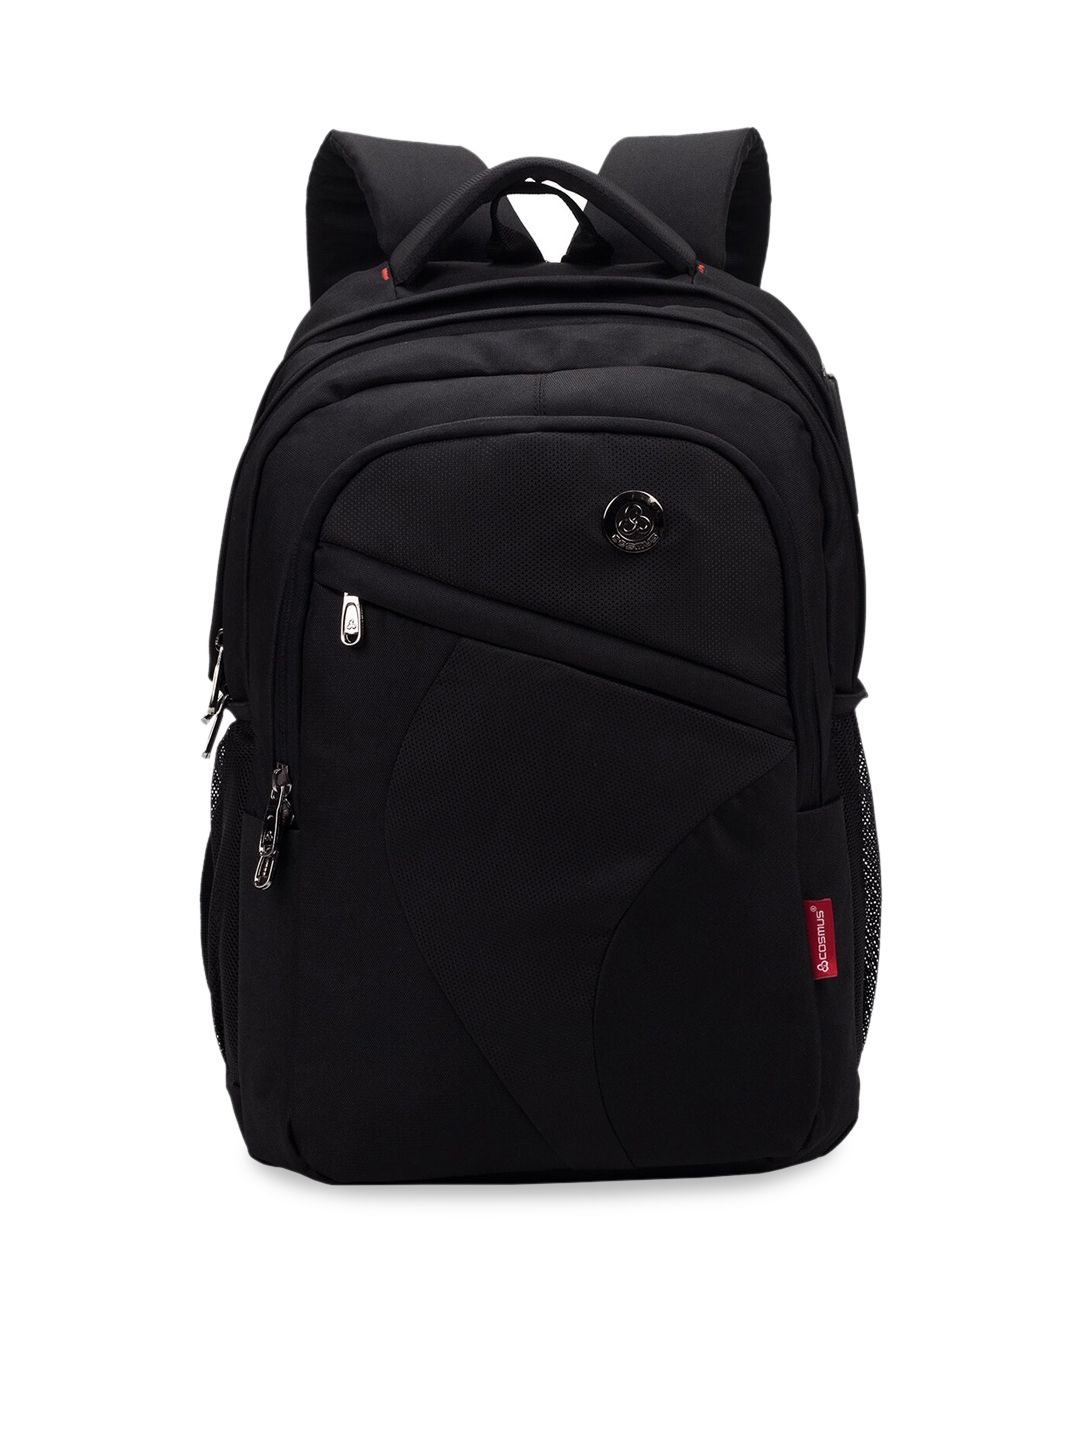 COSMUS Unisex Black Solid Backpack Price in India